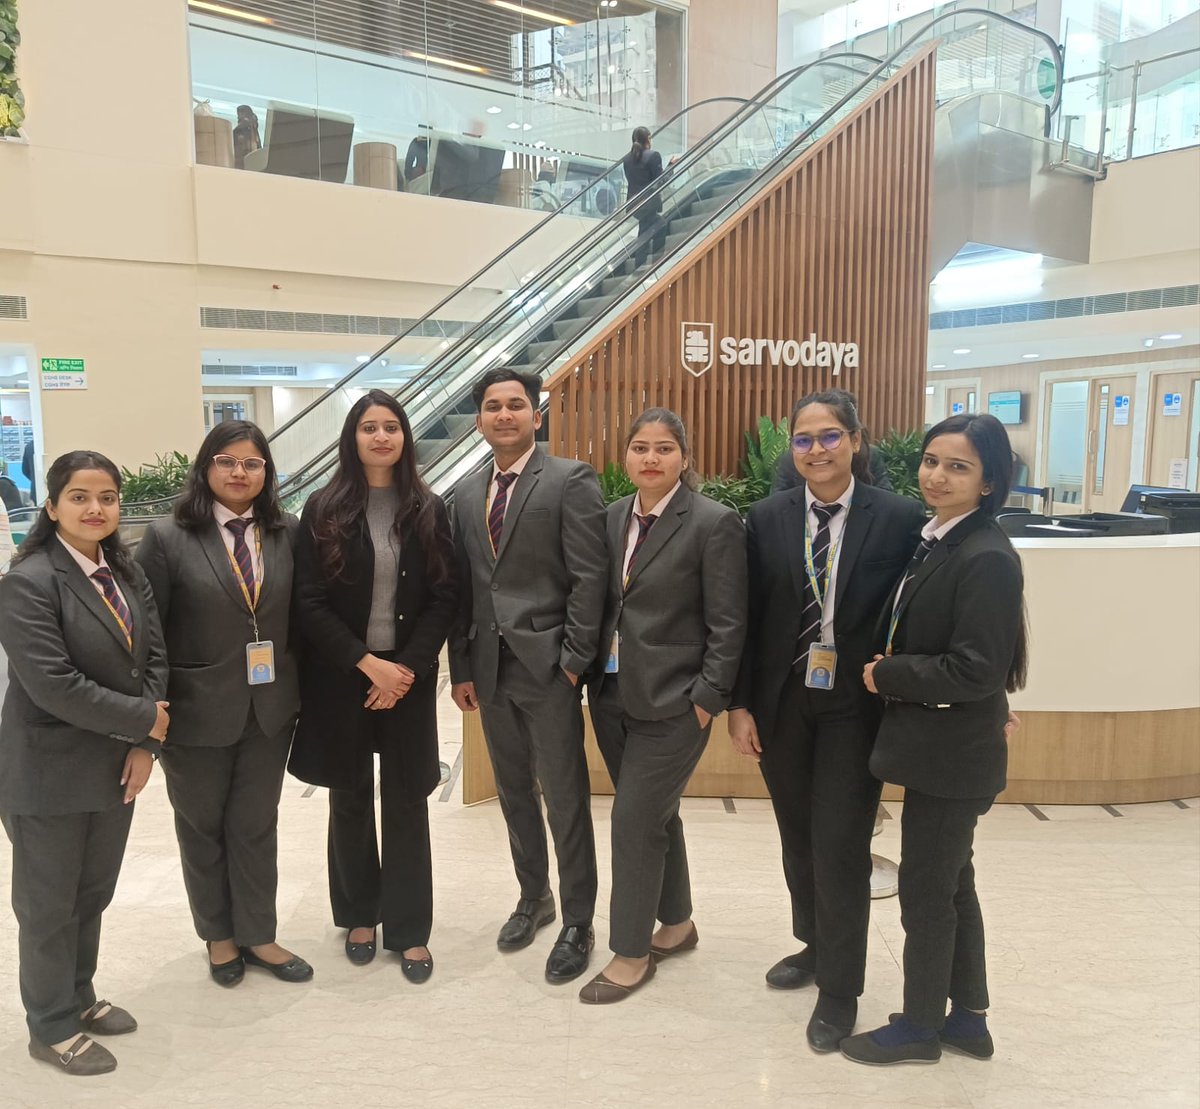 GNIOT MBA Institute recently orchestrated a valuable Industrial Visit for MBA Healthcare Management students , delving into Sarvodaya Healthcare at Gaur City-2.
#MBA
#MBAINSTITUTE
#BESTMBACOLLEGE
#BESTPLACEMNTCOLLEGE
#MBAGREATERNOIDA
#GNIOTMBA